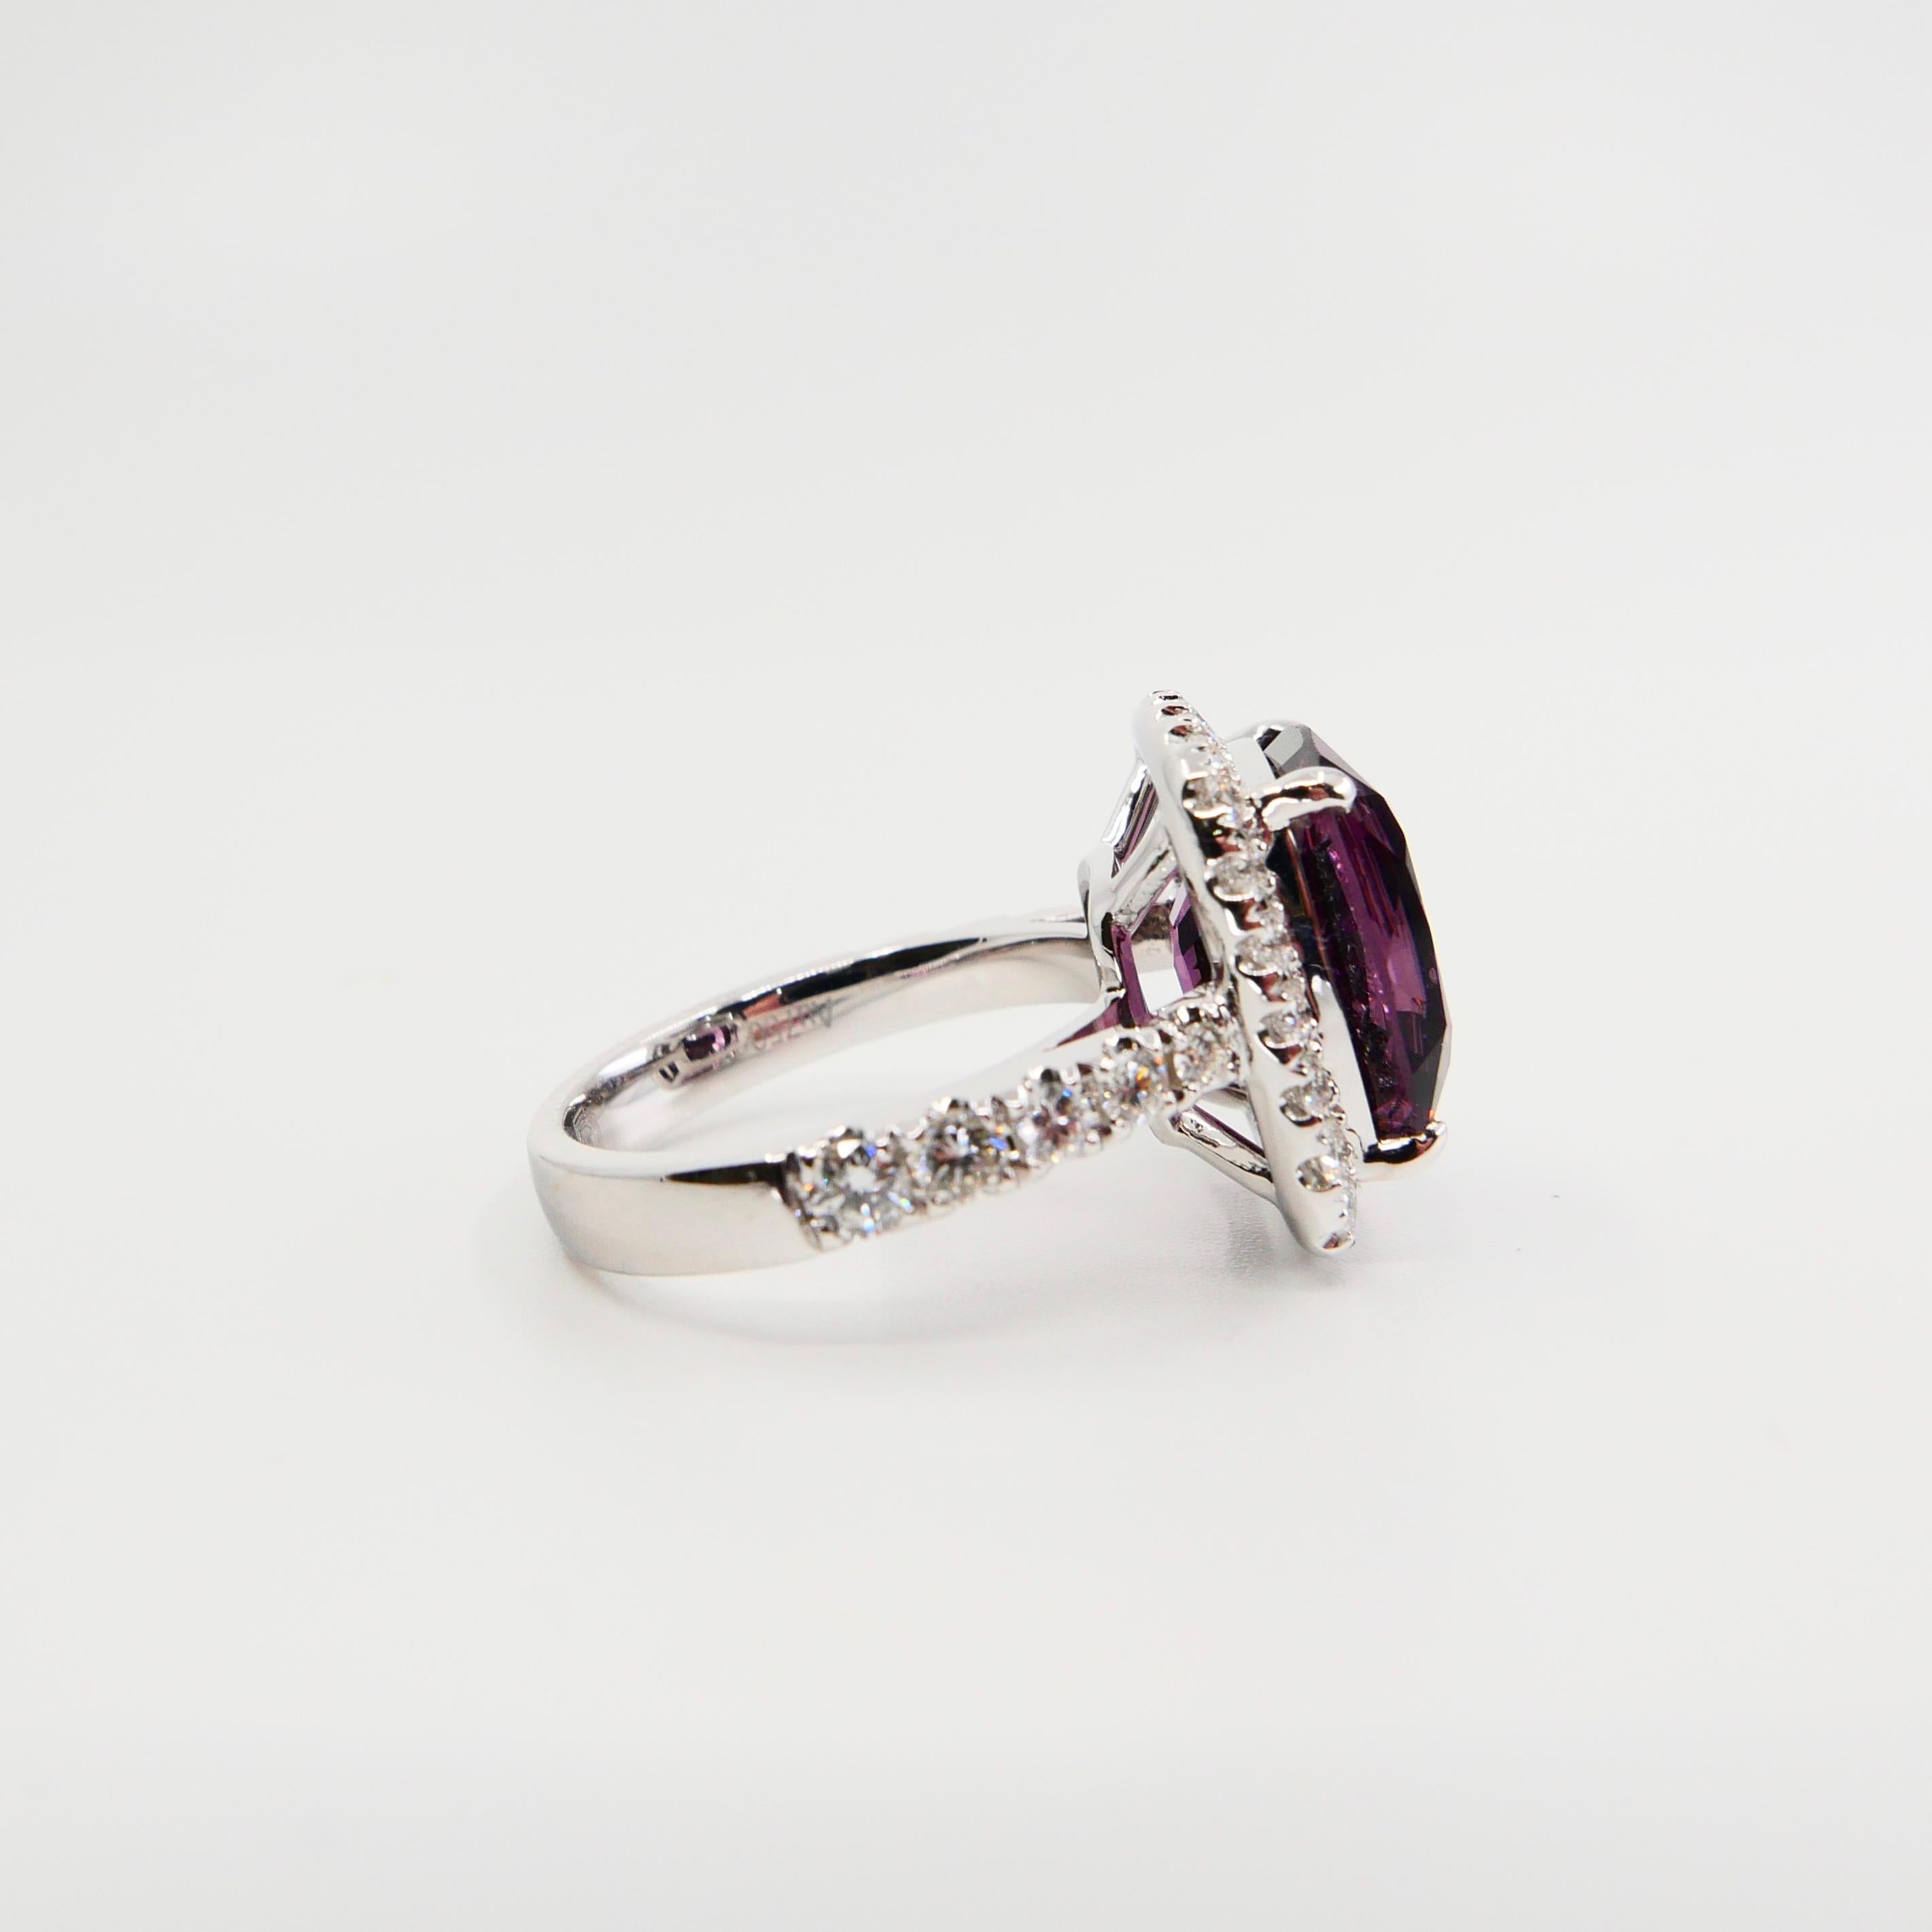 Certified Natural 9.18 Carat Vivid Purple No Heat Spinel & Diamond Cocktail Ring For Sale 9